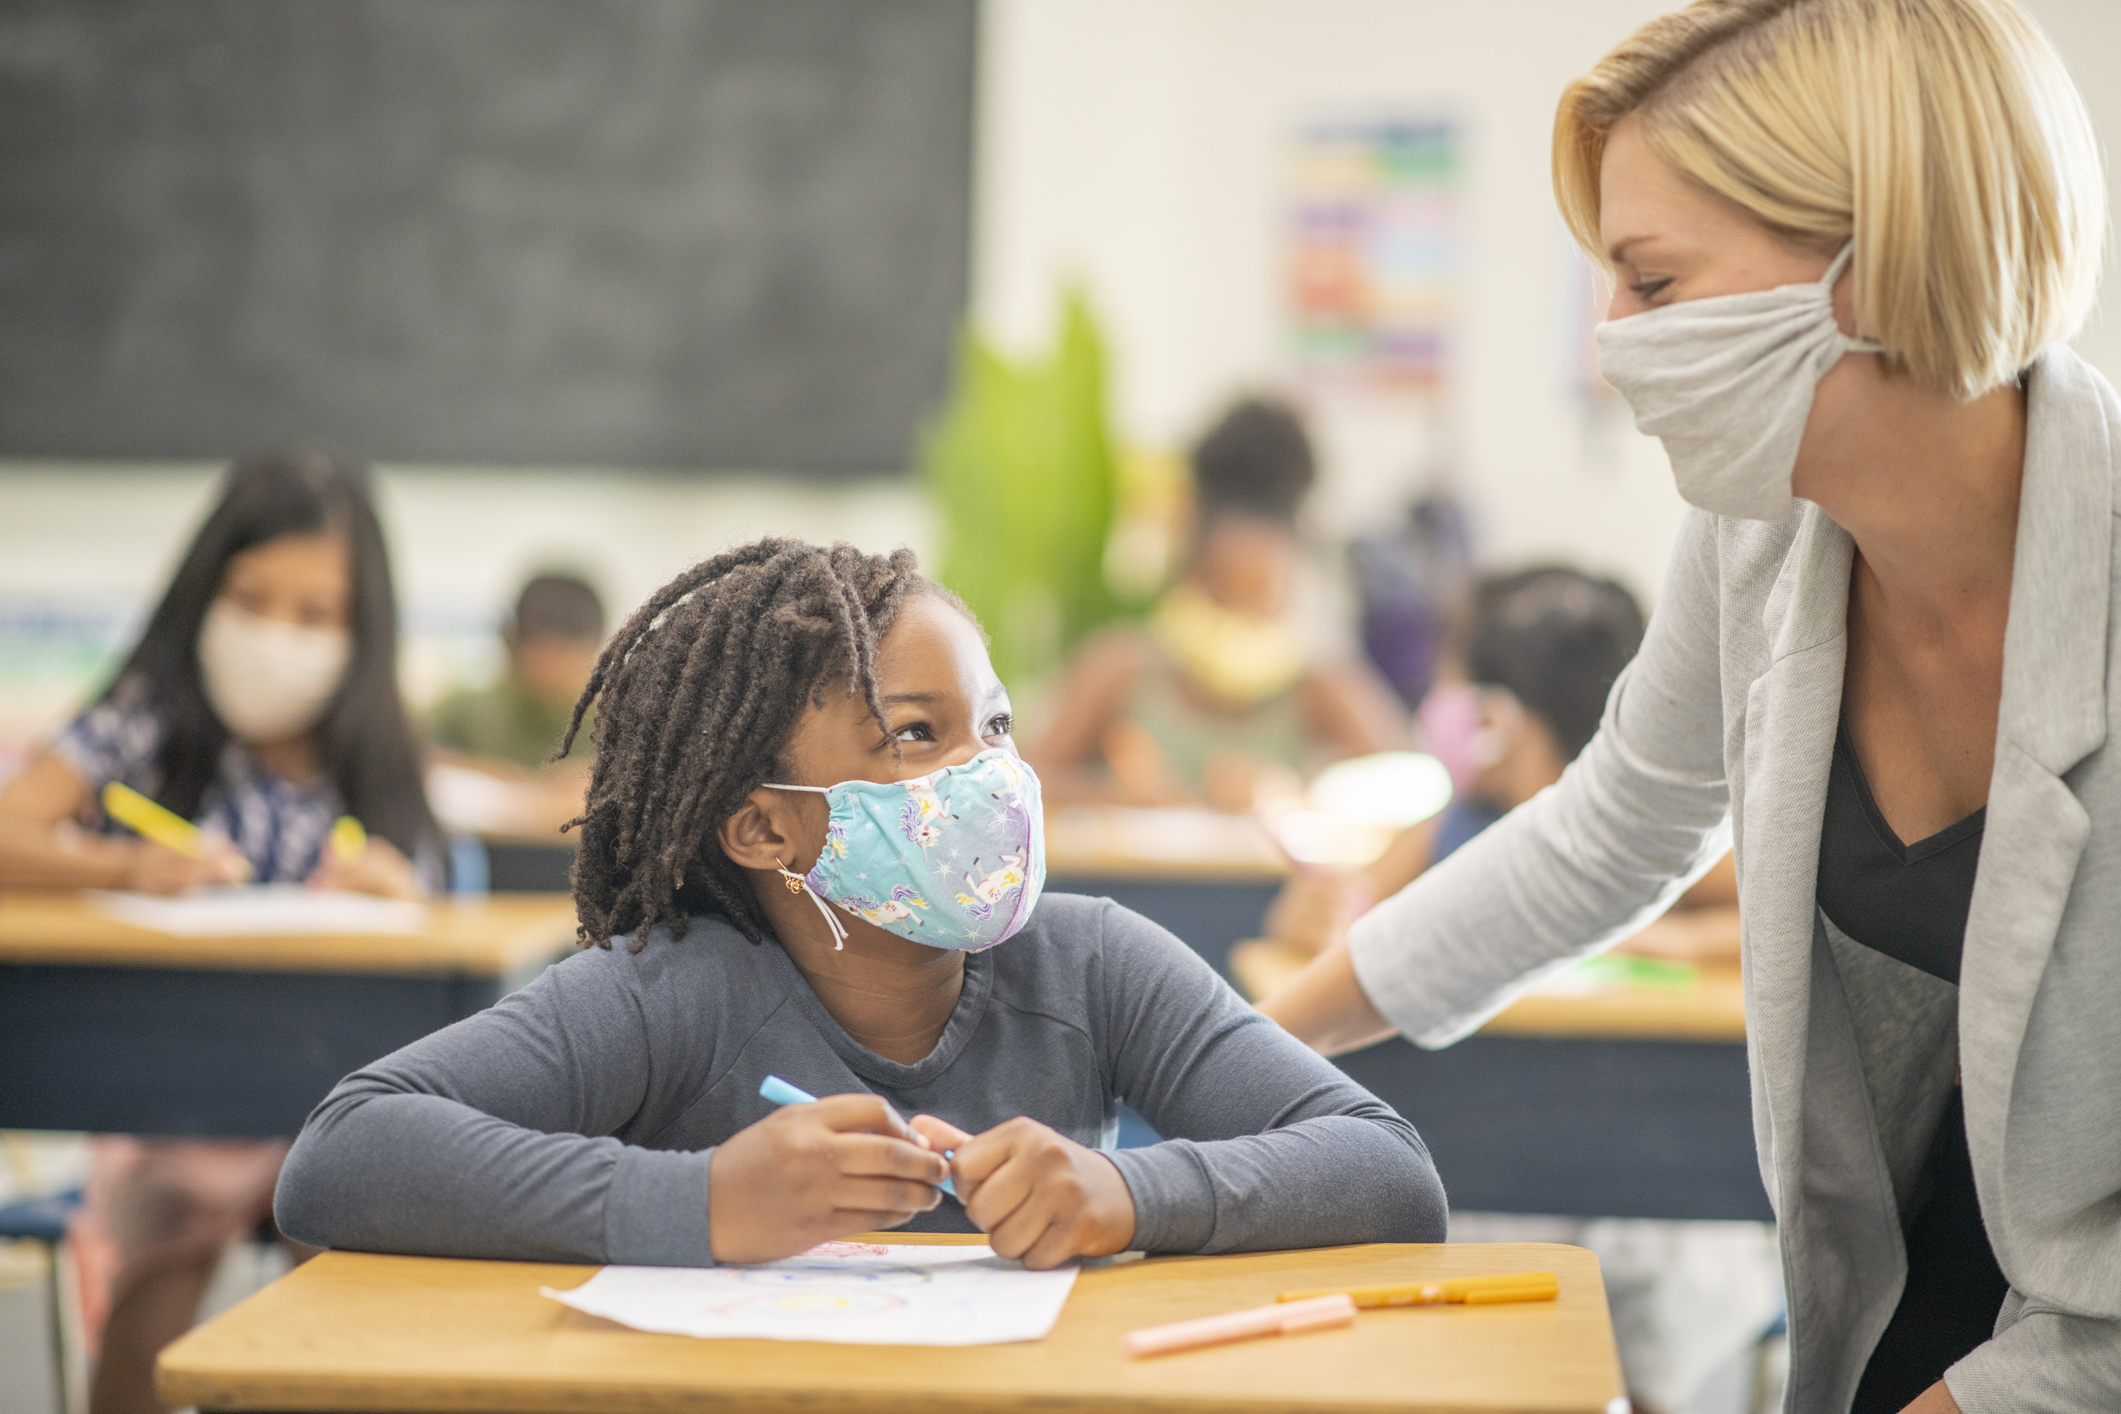 6 year old, African American student wearing a protective face mask in class